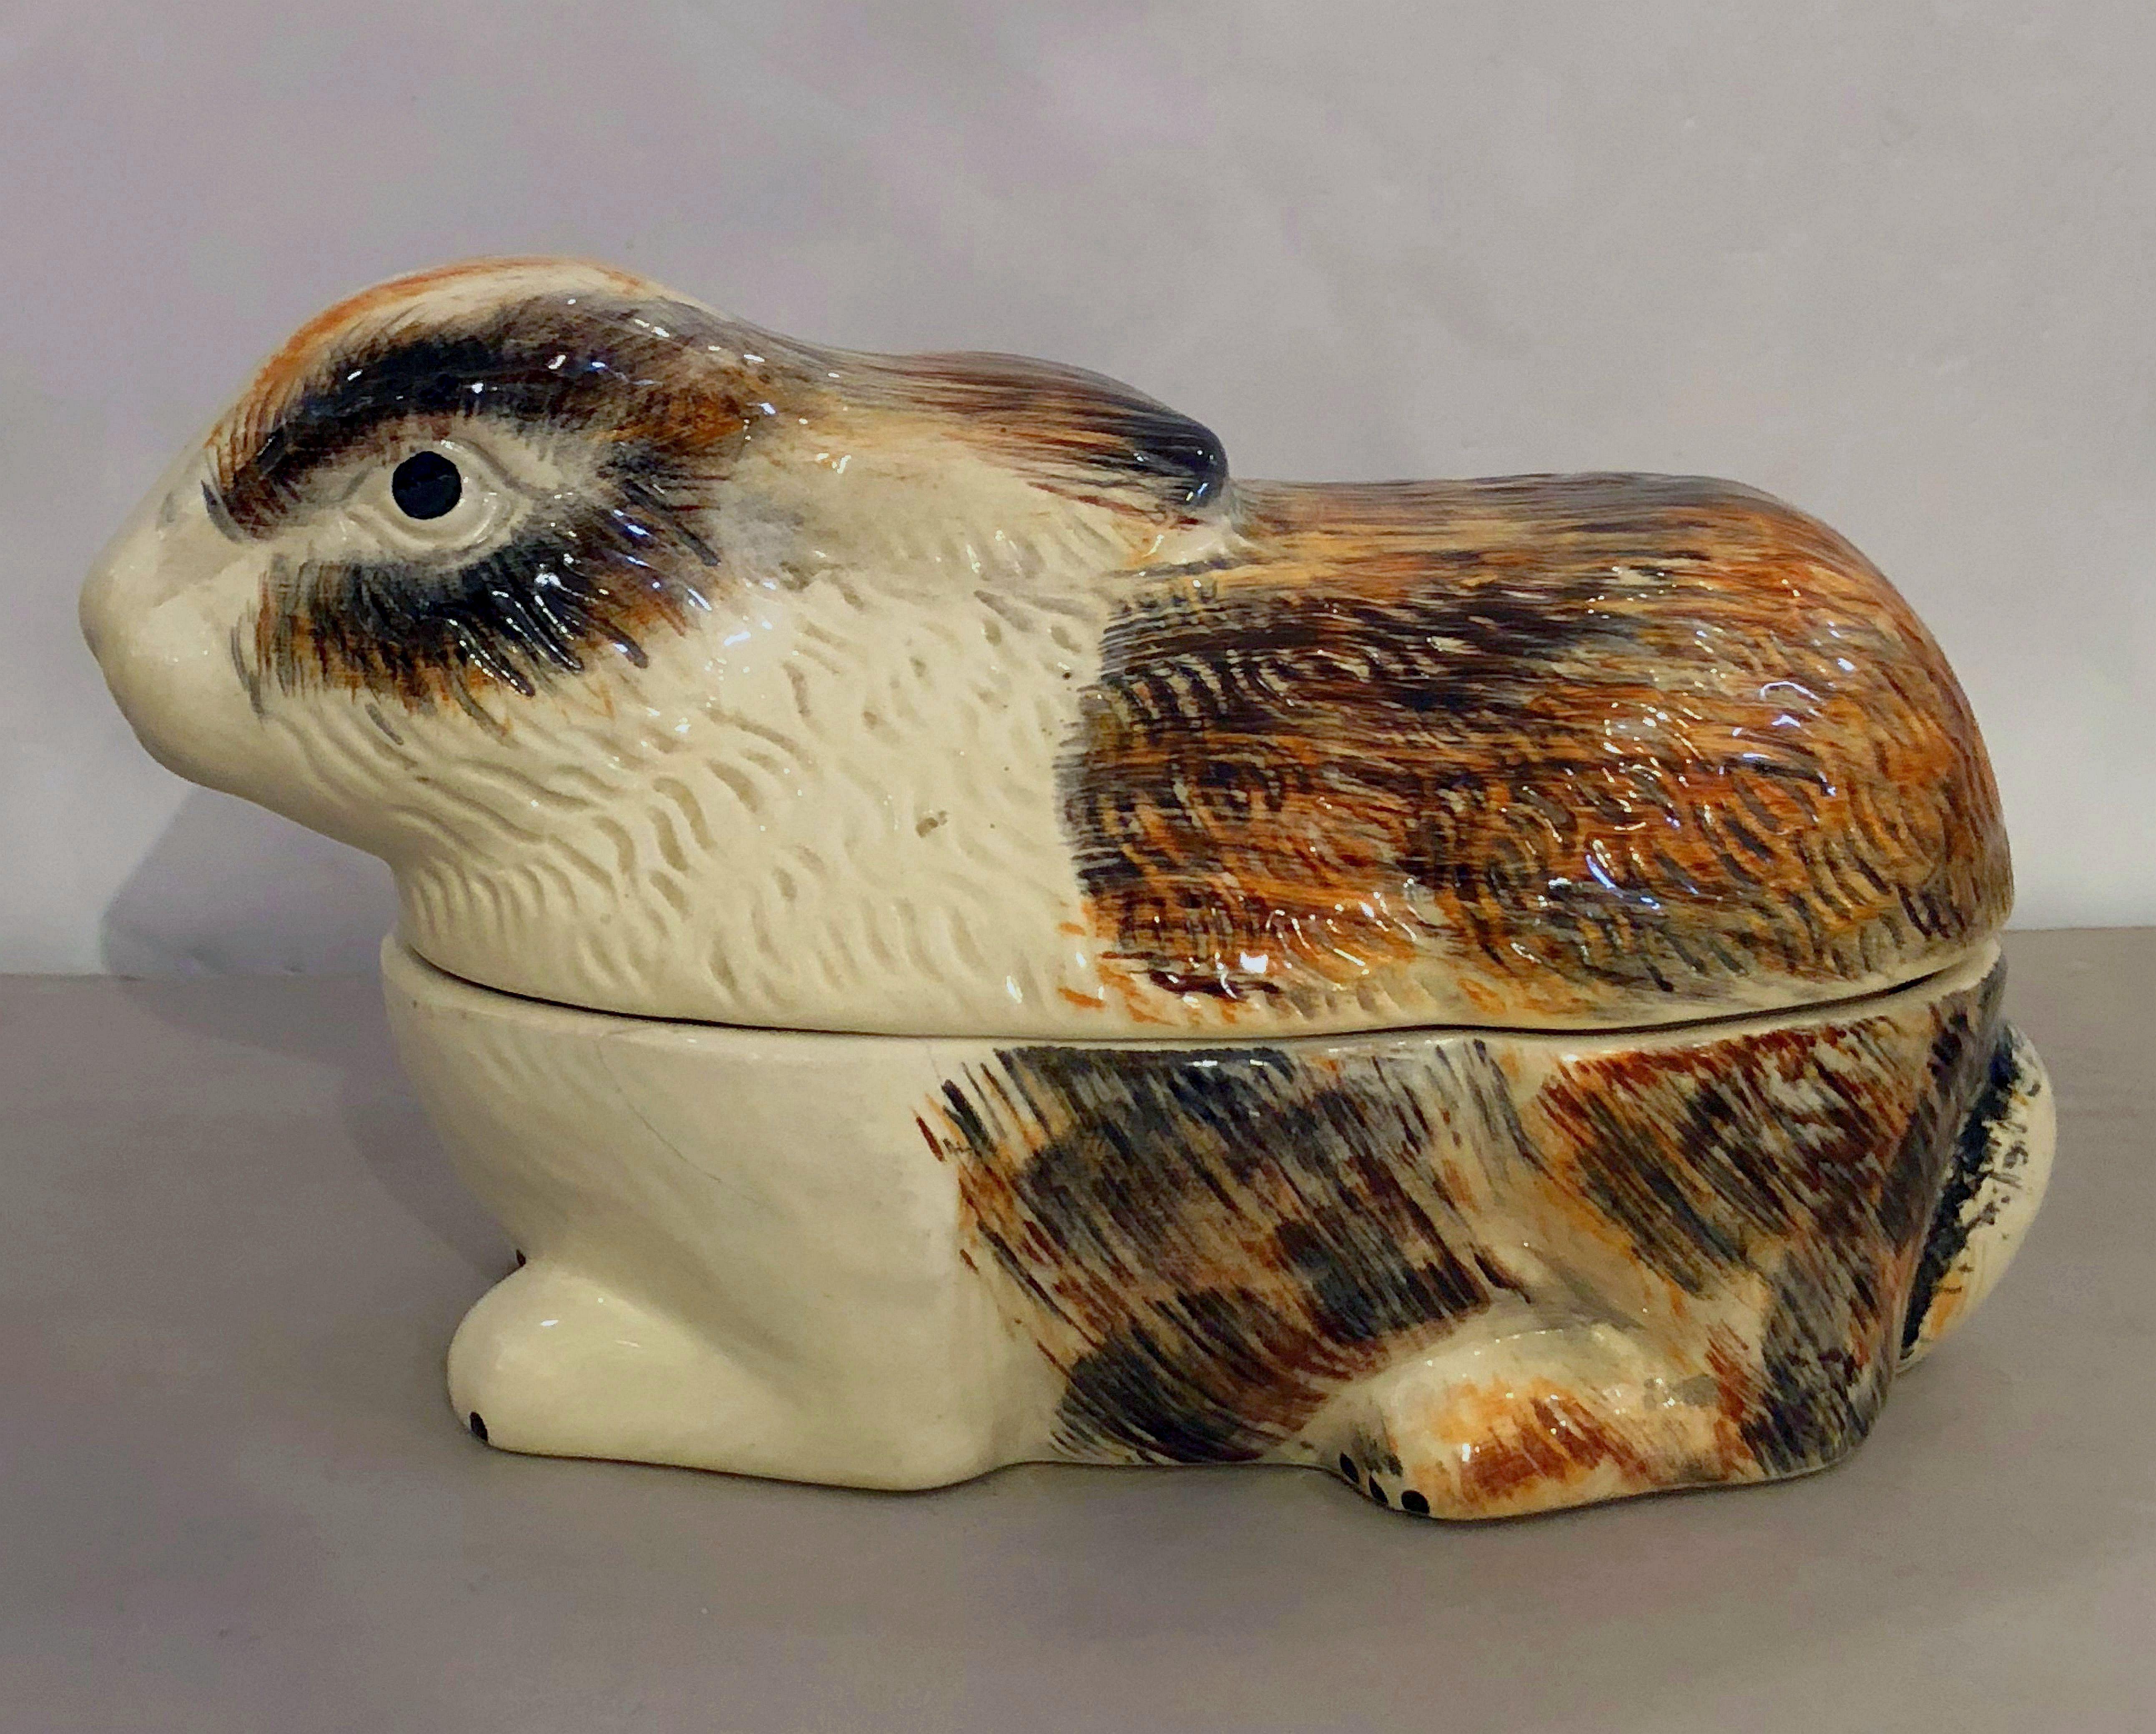 A fine French faience tureen (pâté terrine) with lid and under tray in the shape of a reclining rabbit by Michel Caugant.

Caugant signature on bottom.

